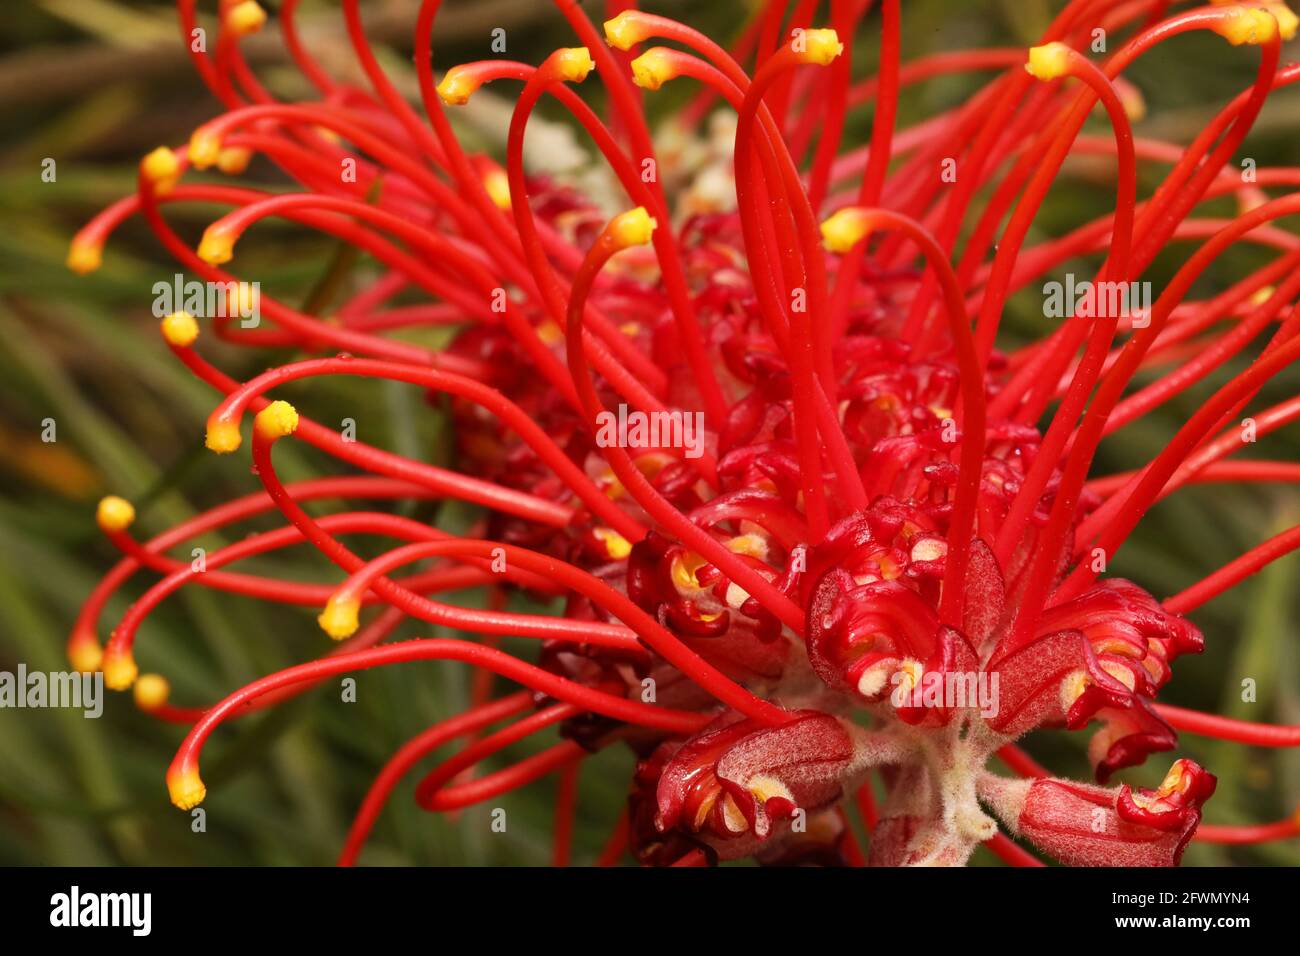 A close up macro image of a intensely bright red, yellow and orange Australian Native Grevillea flower. Floral bloom of Stock Photo